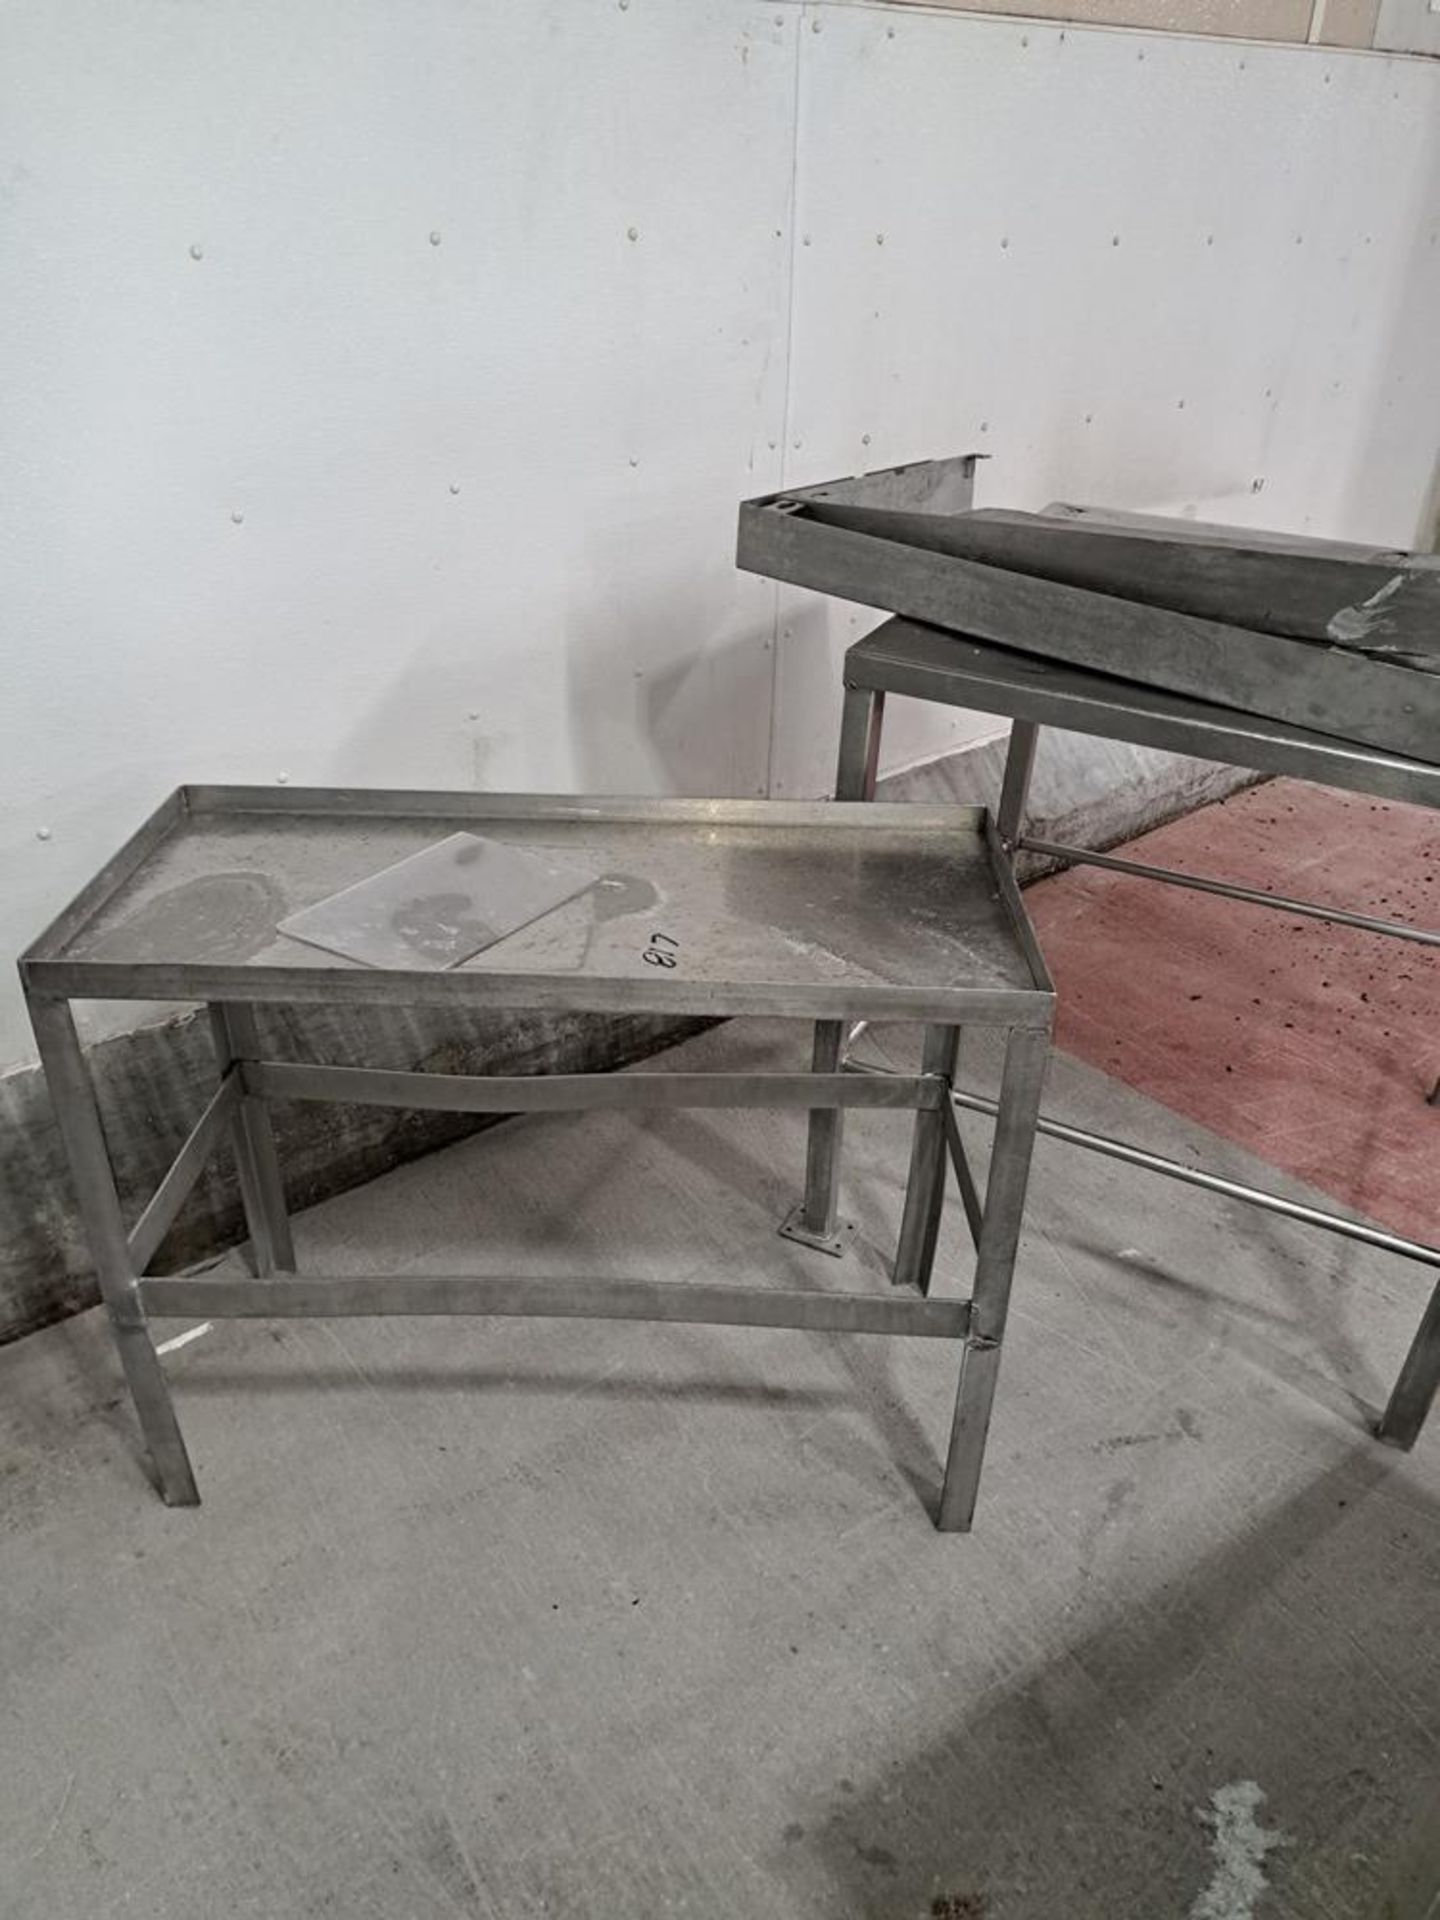 Lot Stainless Steel Meat Wash, (3) Stainless Steel Tables: Required Loading Fee $200.00, Rigger-Norm - Image 4 of 7